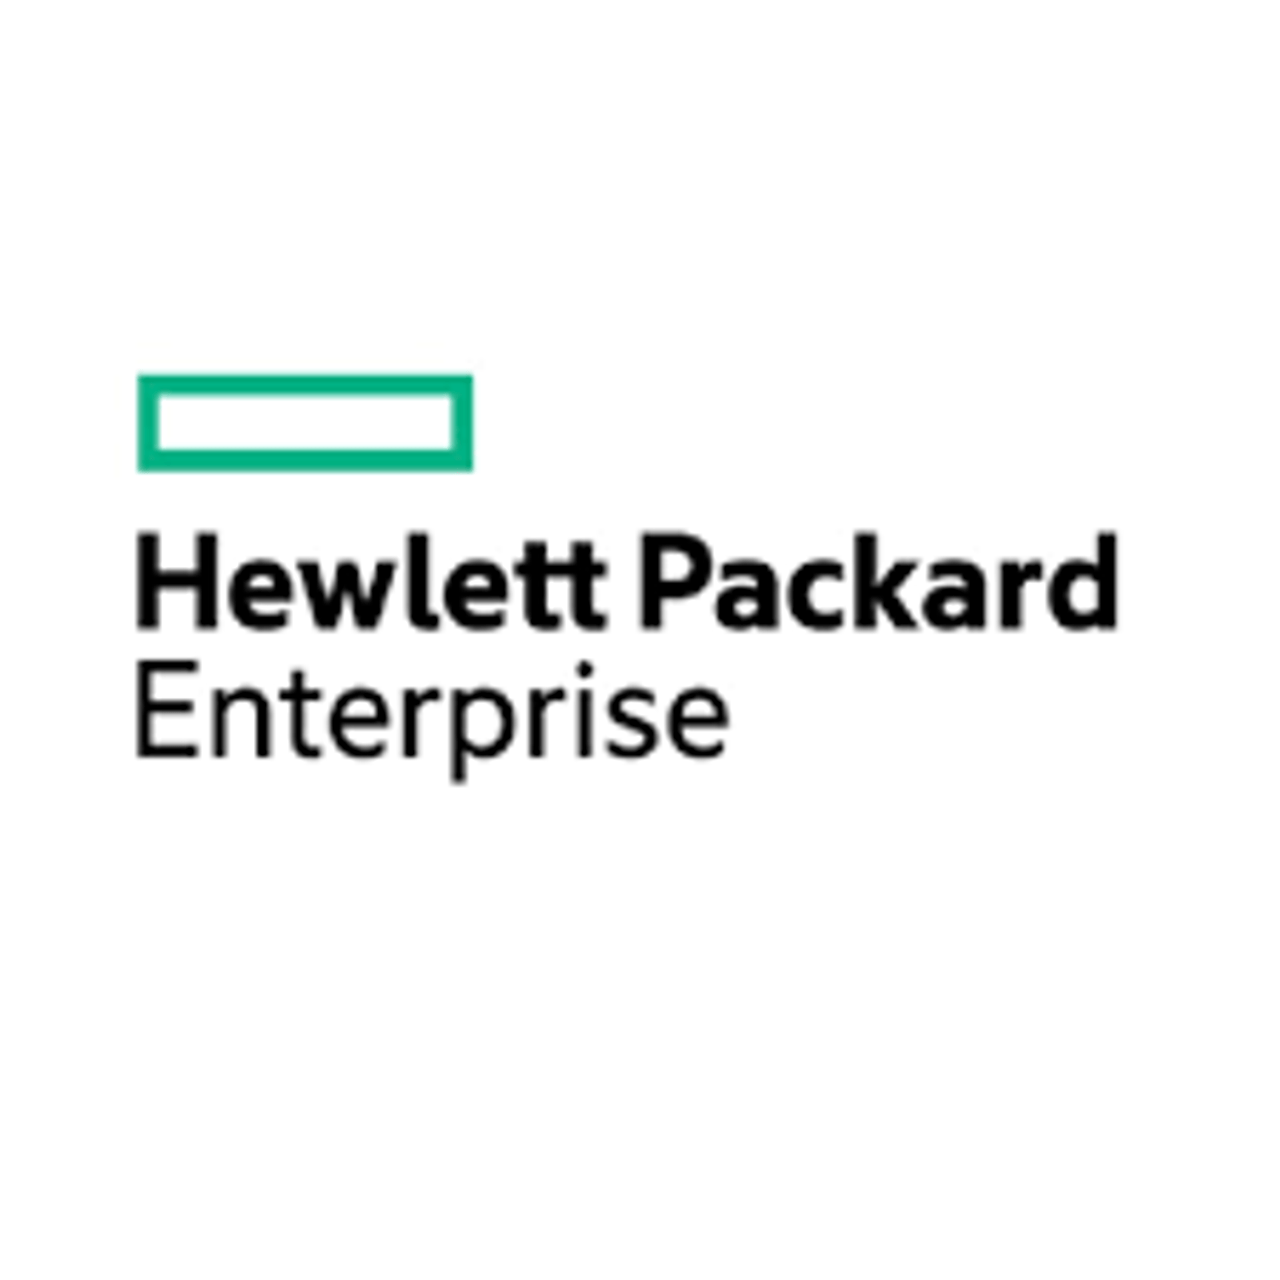 HPE Technical Installation Startup SVC HPE Insight Control Startup SVC